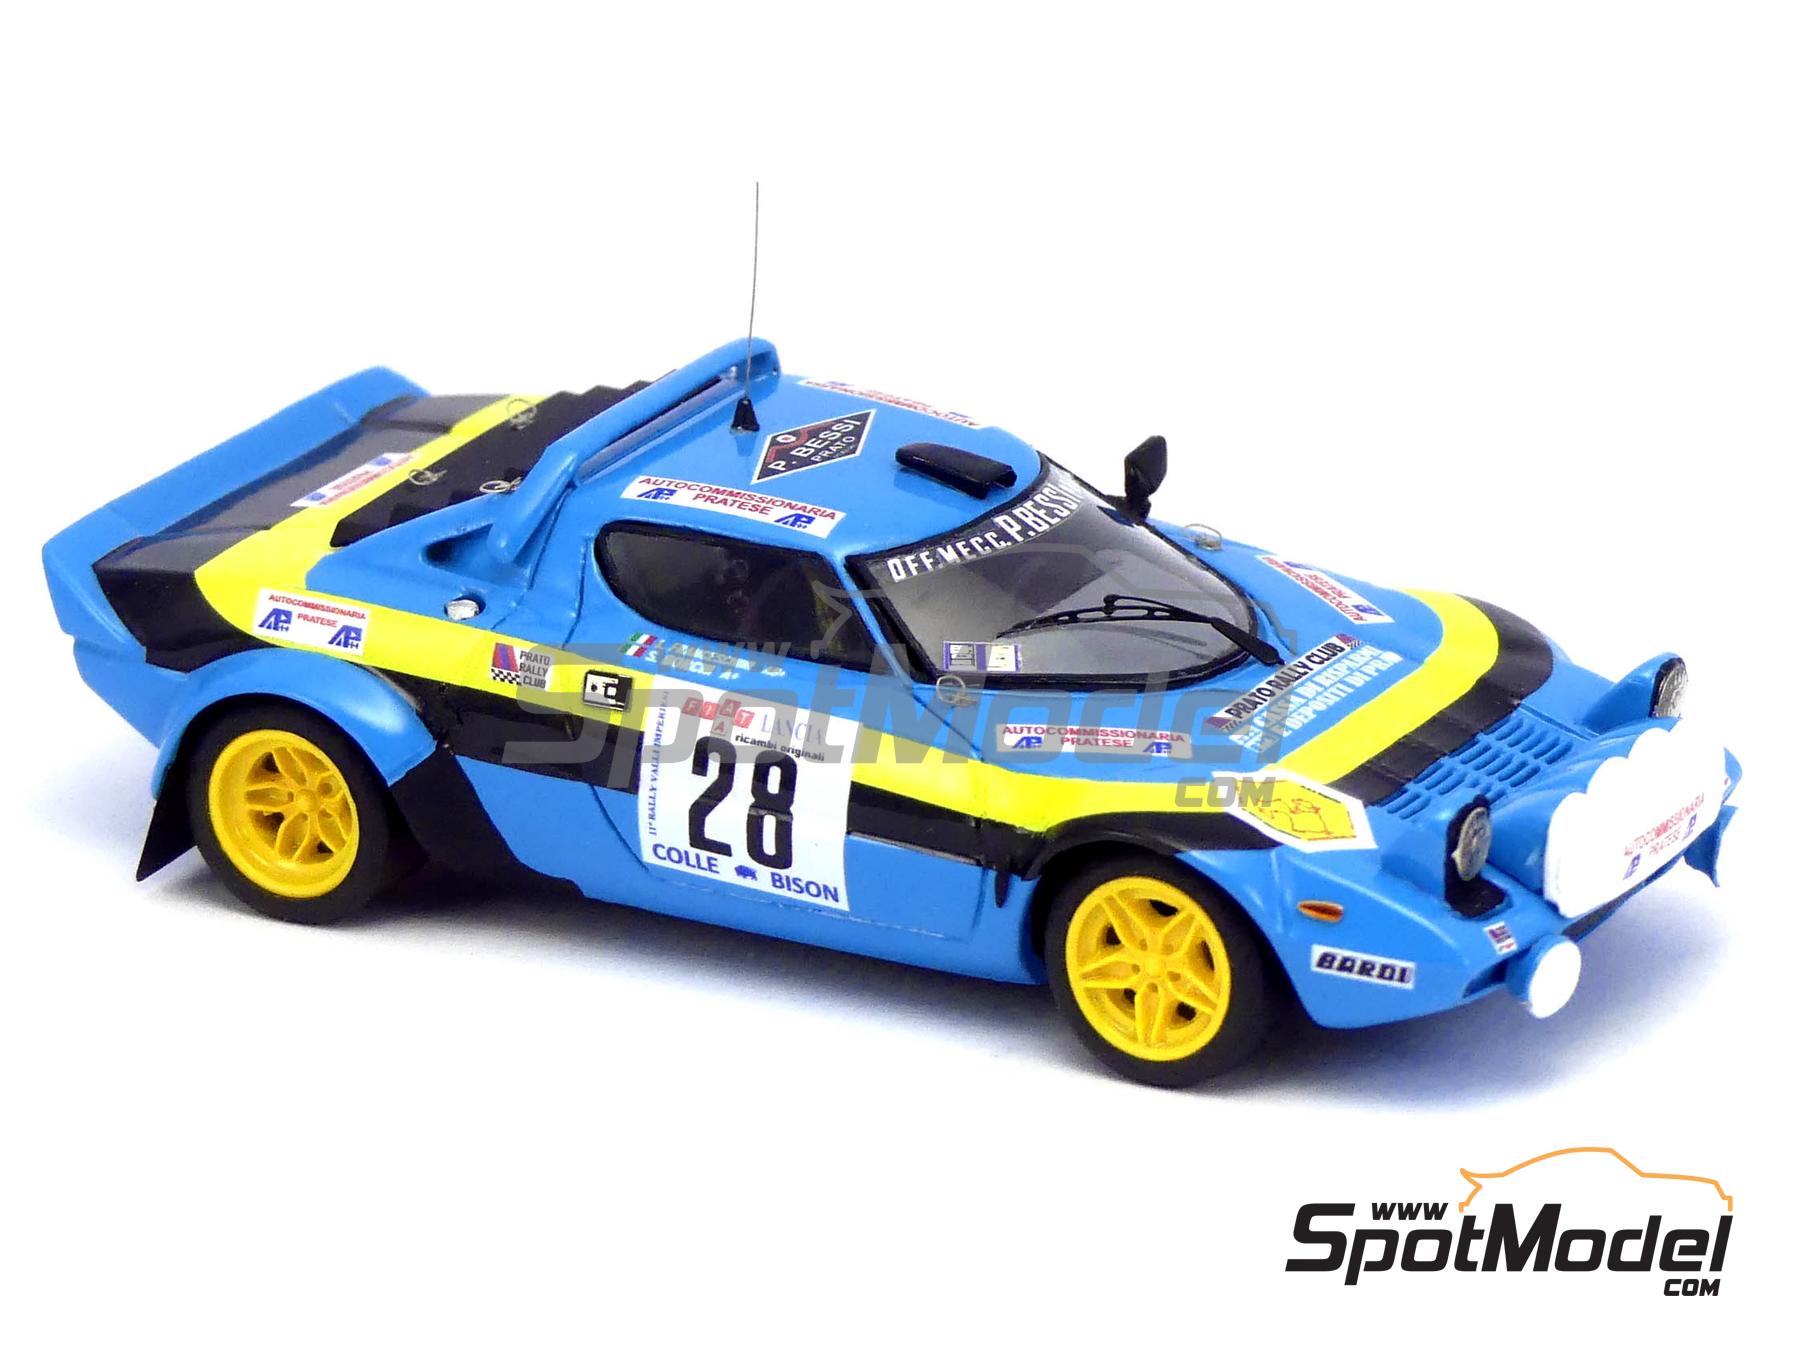 Lancia Stratos HF Prato Rally Club Team - Valli Imperiesi Rally 1982. Car  scale model kit in 1/43 scale manufactured by Arena Modelli (ref. ARE1285)